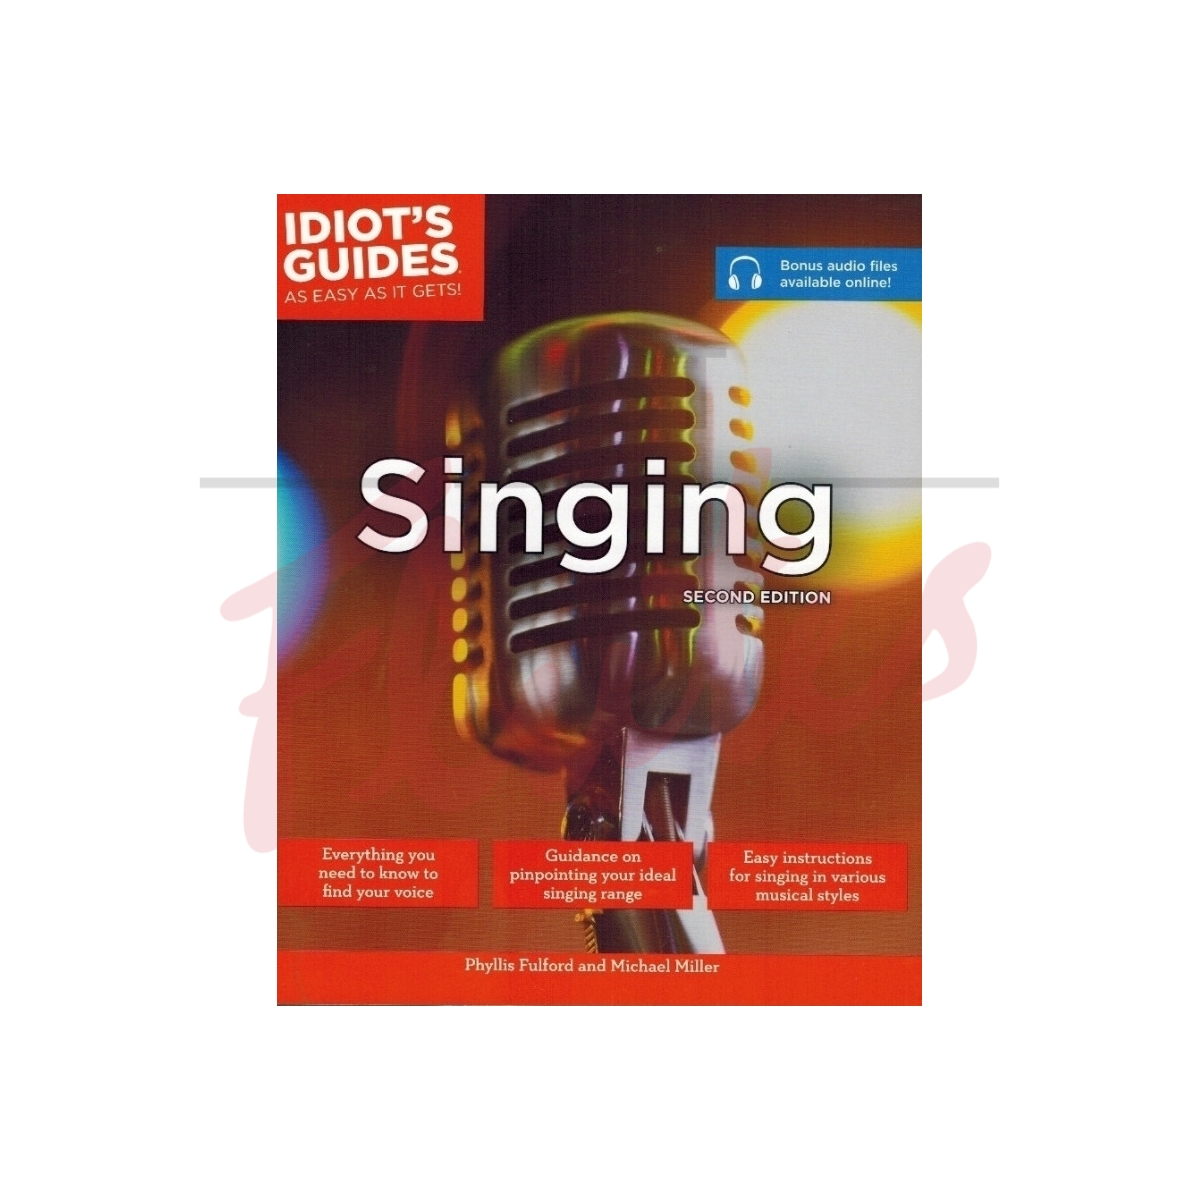 Idiot's Guides - Singing [Second Edition]